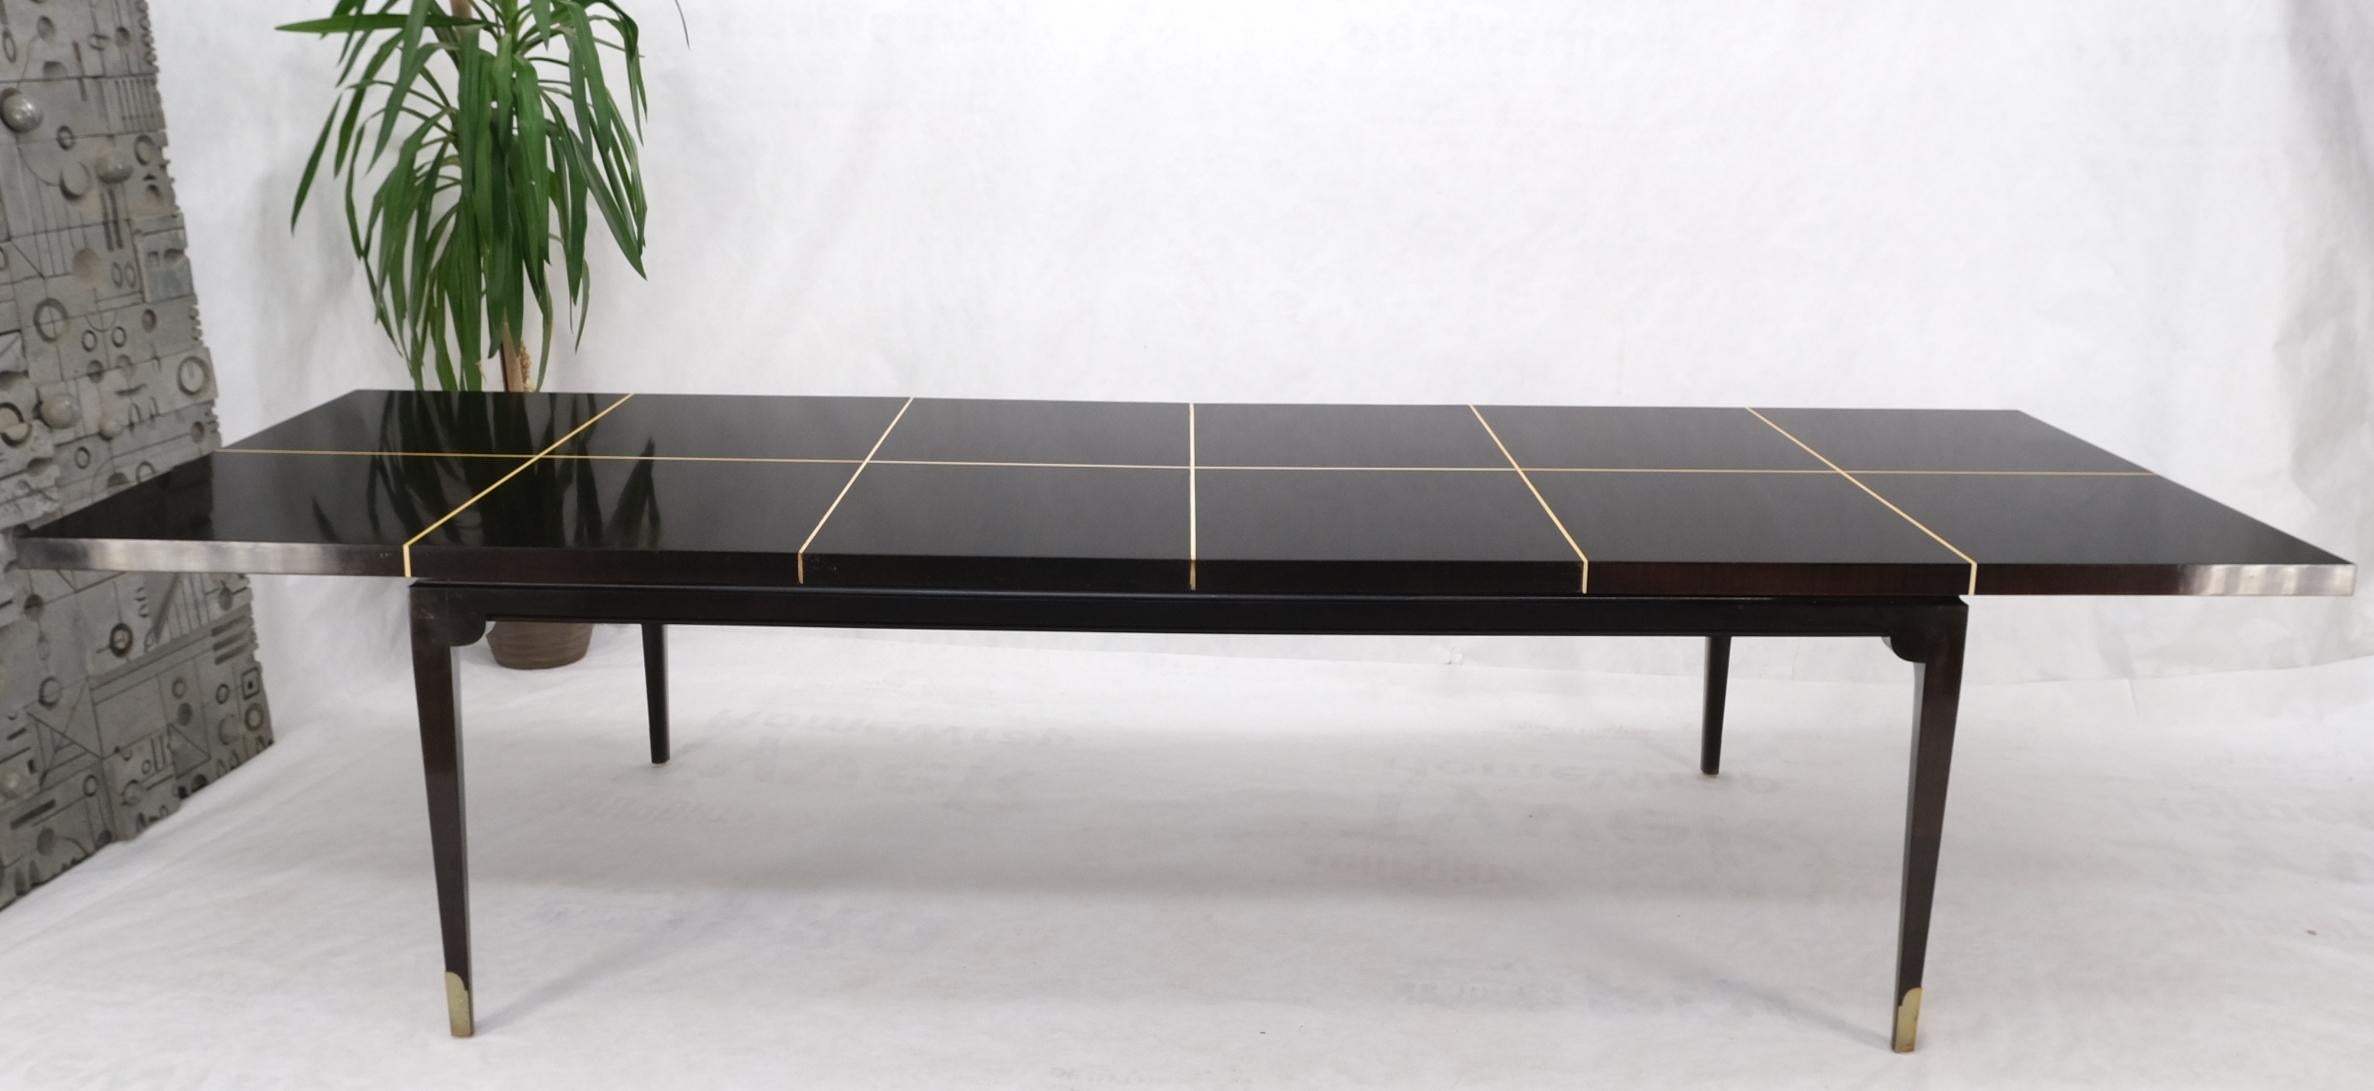 Large Tommi Parzinger Lacquered Mahogany Brass Feet Tapered Legs Dining Table For Sale 9